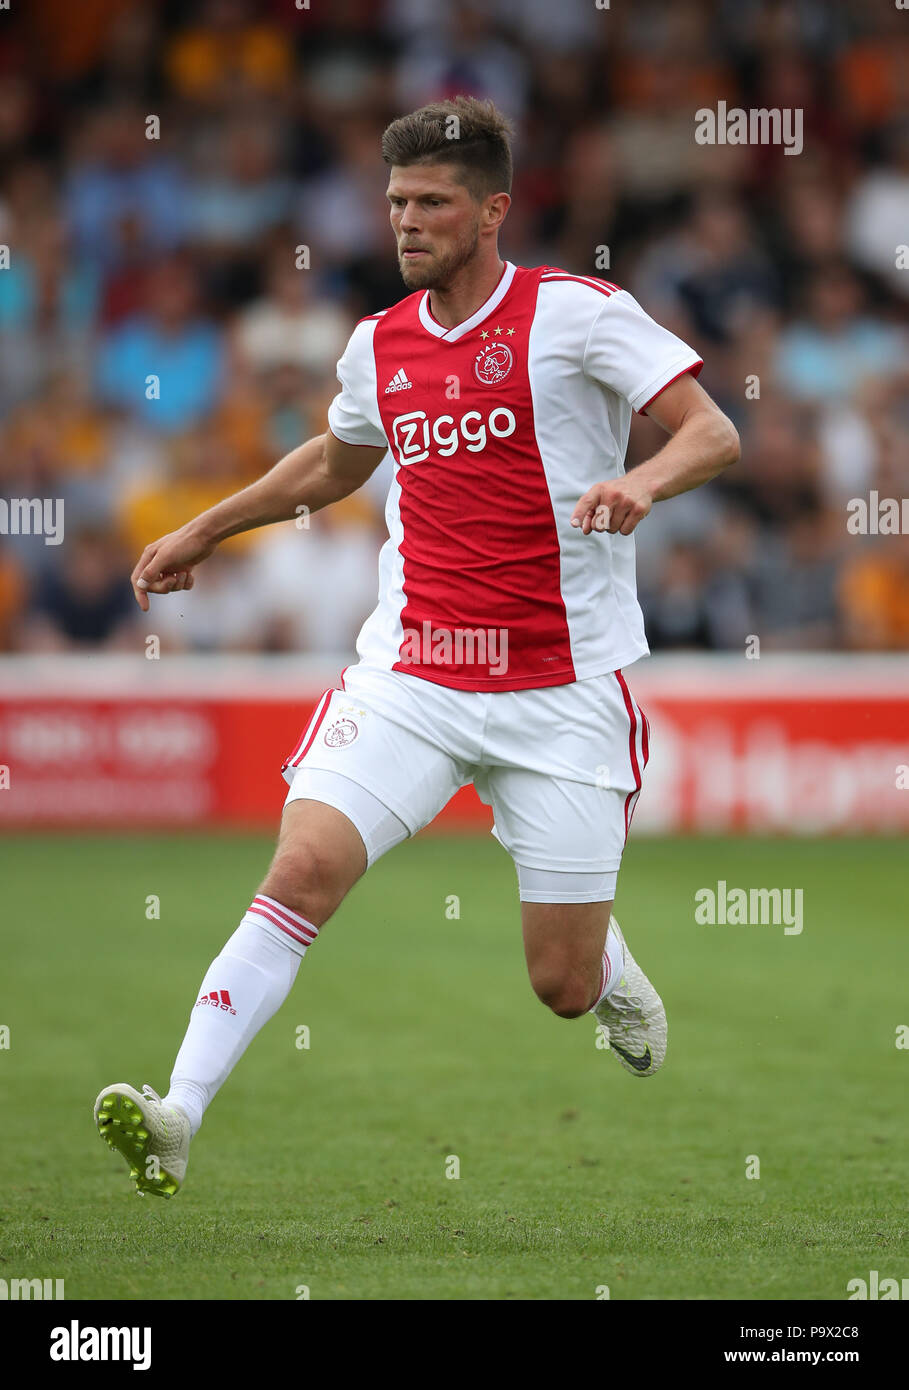 Ajax's Klass Jan Huntelaar during a pre season friendly match at the Banks's Stadium, Walsall. PRESS ASSOCIATION Photo. Picture date: Thursday July 19, 2018. Photo credit should read: Nick Potts/PA Wire. EDITORIAL USE ONLY No use with unauthorised audio, video, data, fixture lists, club/league logos or 'live' services. Online in-match use limited to 75 images, no video emulation. No use in betting, games or single club/league/player publications. Stock Photo